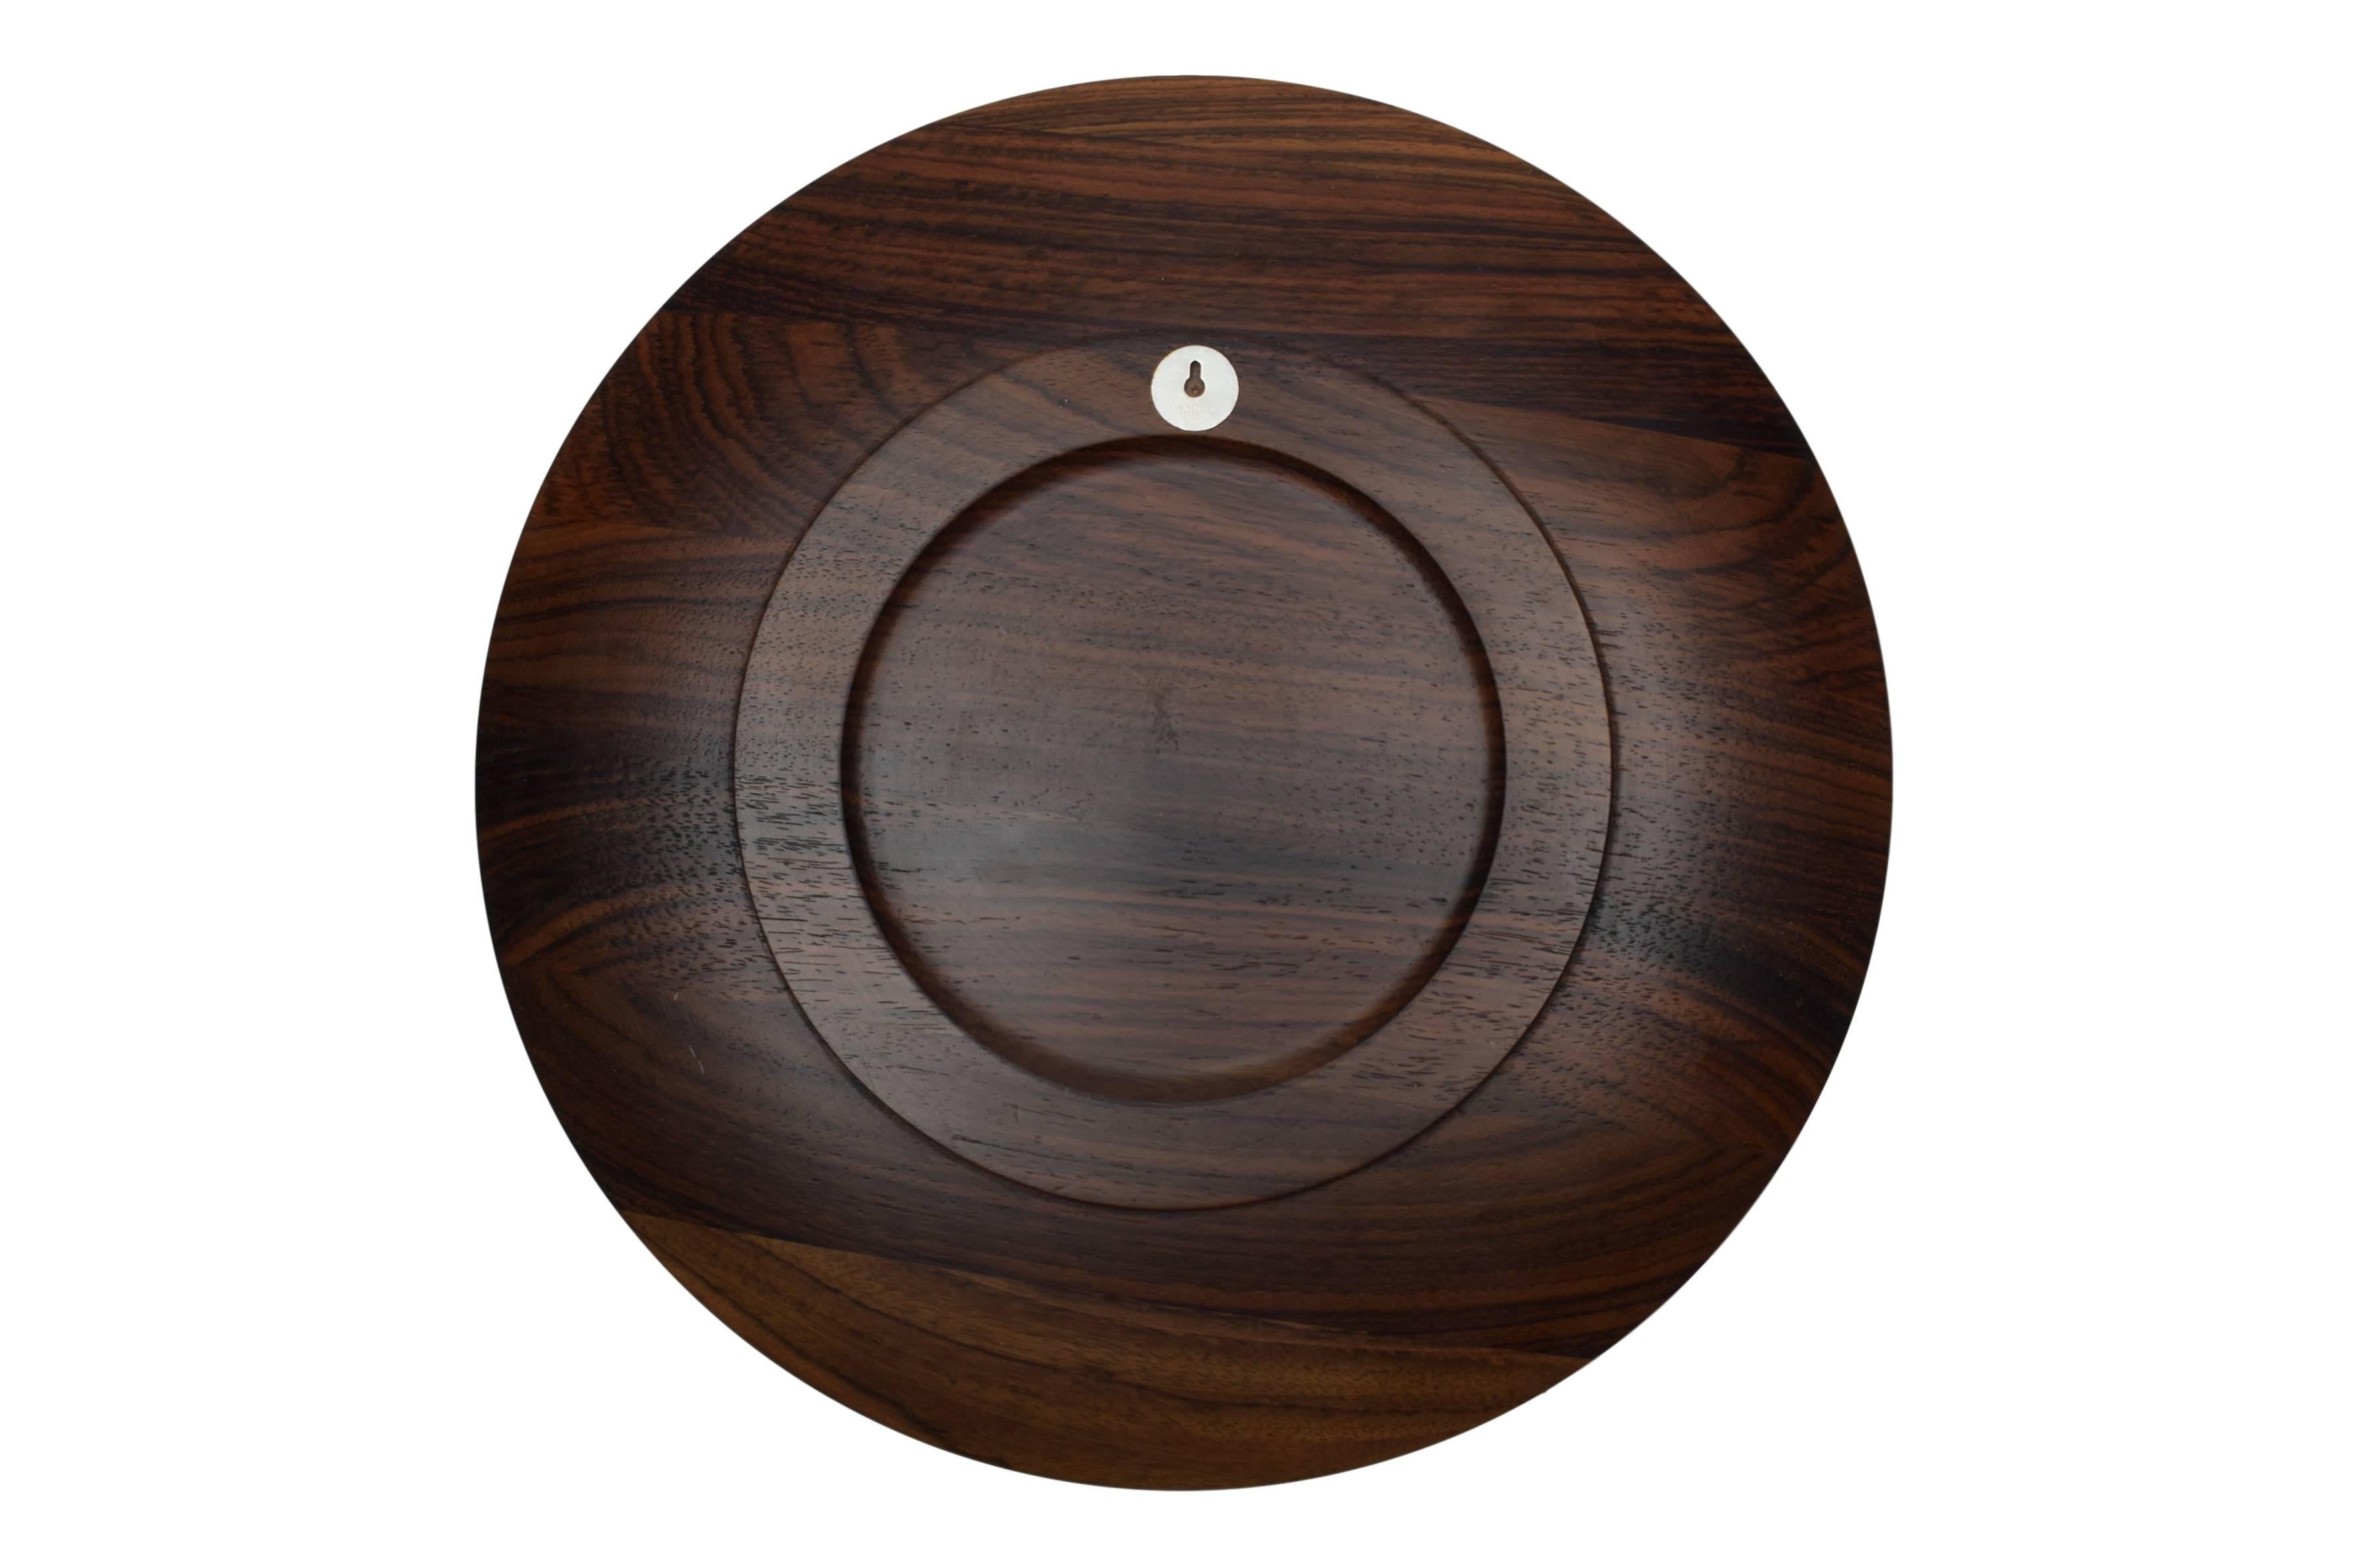 A Danish midcentury rosewood plate or wall platter with sterling silver inlays depicting a Greenlandic motive. Design by Robert Dalgas lassen.

These platters were made in a limited edition. The platters were produced in Denmark from 1970 to 1989.